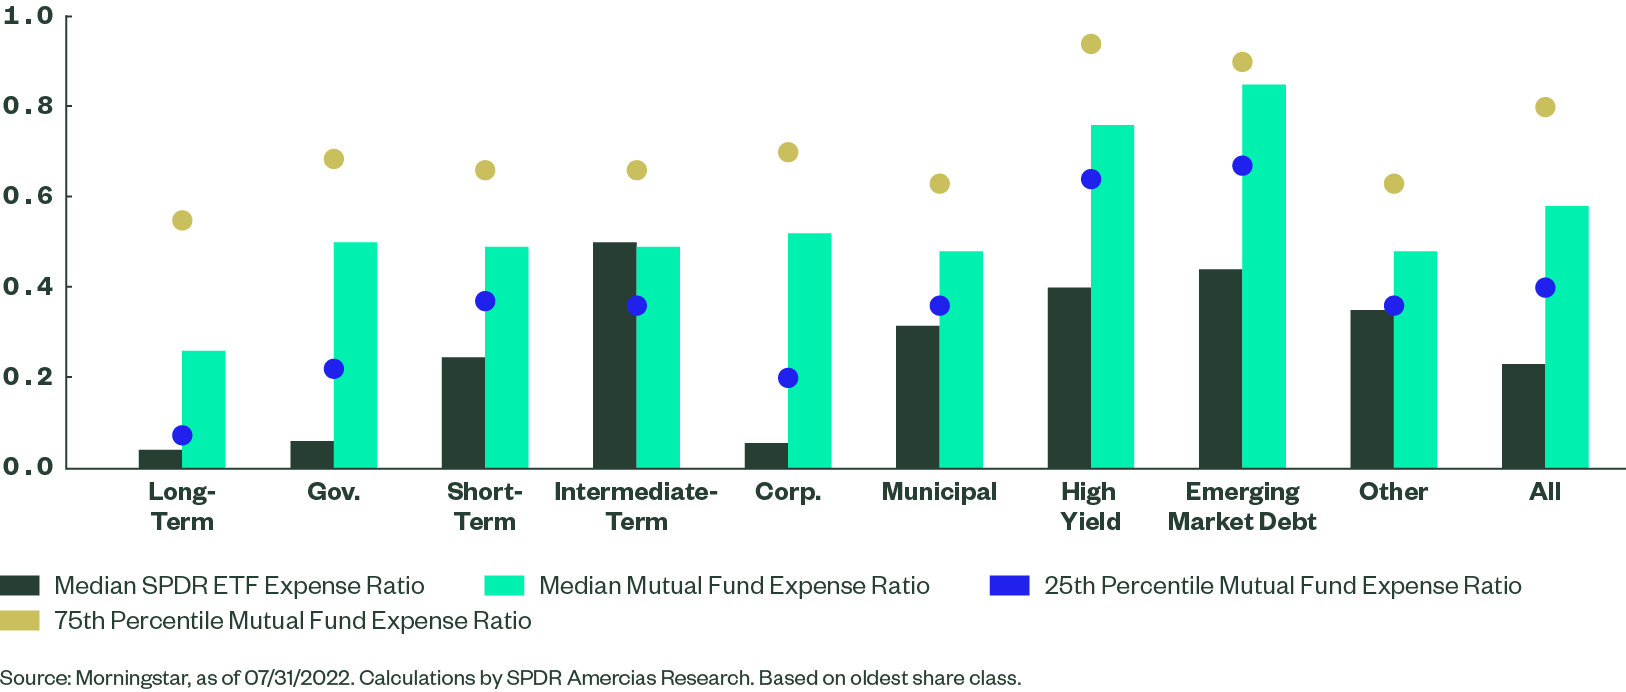 Median SPDR ETF Expense Ratio vs. Comparable Mutual Funds by Broad Category